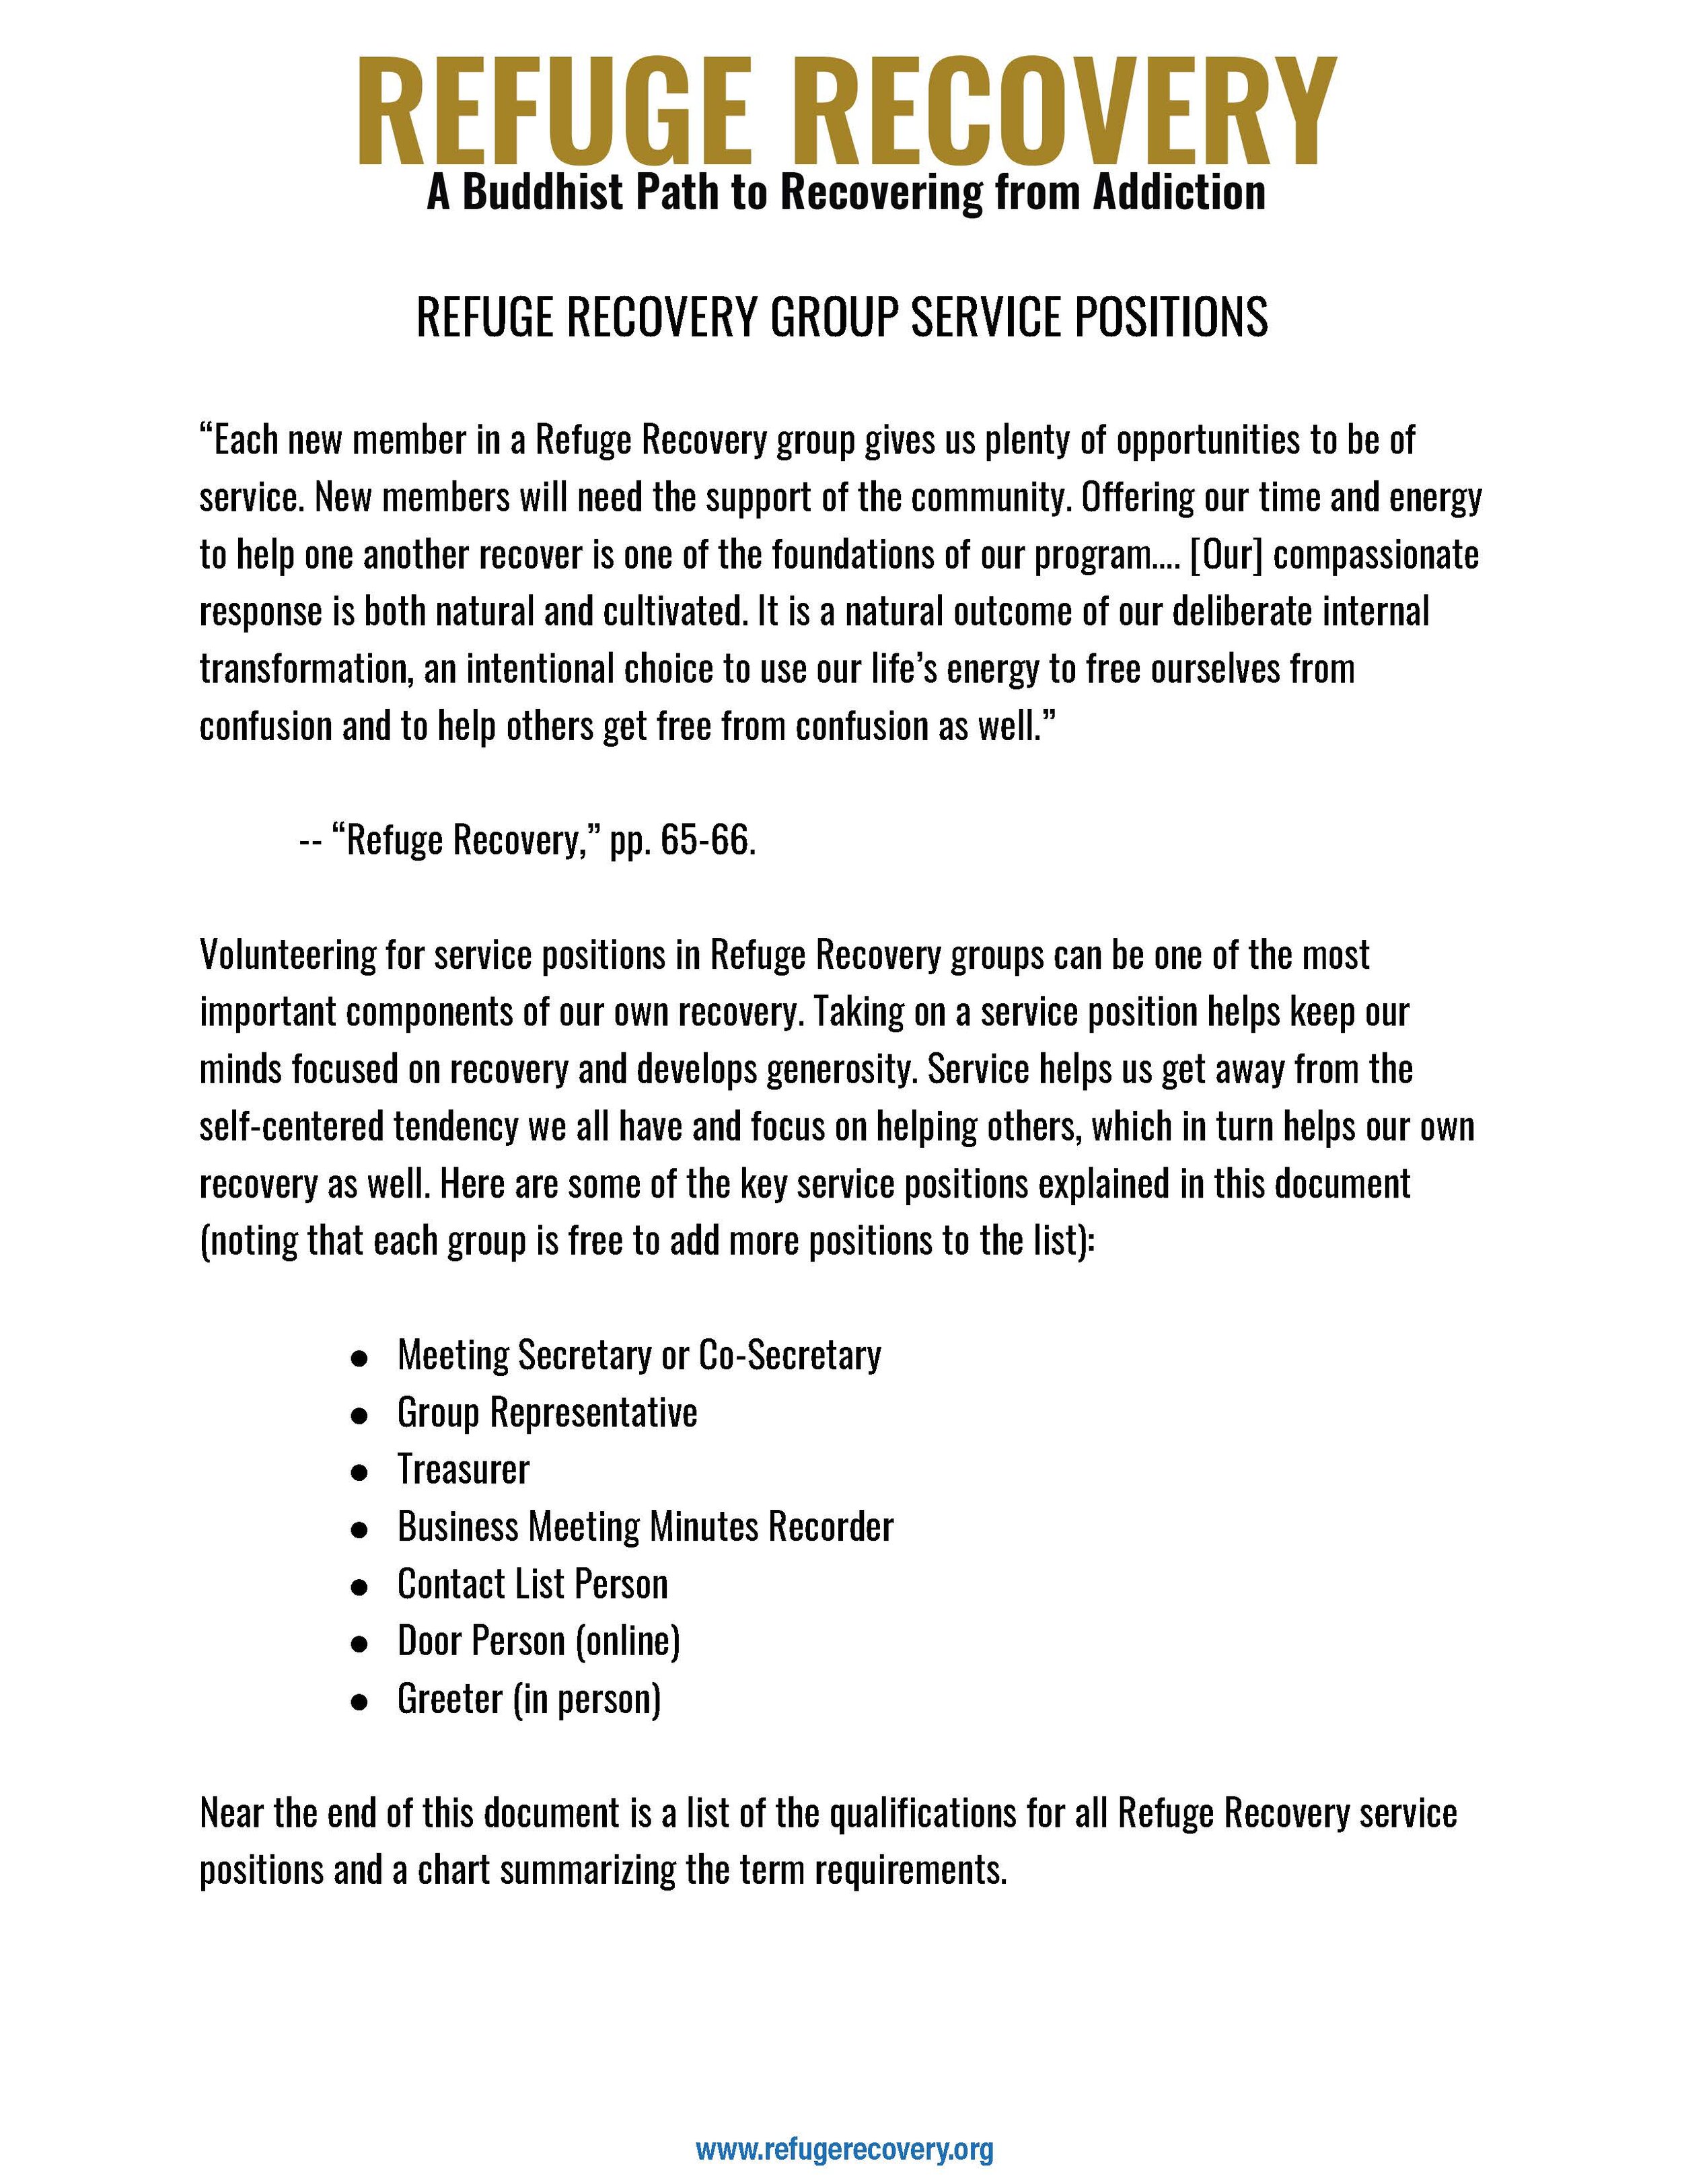 REFUGE RECOVERY GROUP SERVICE POSITIONS_Page_01.jpg